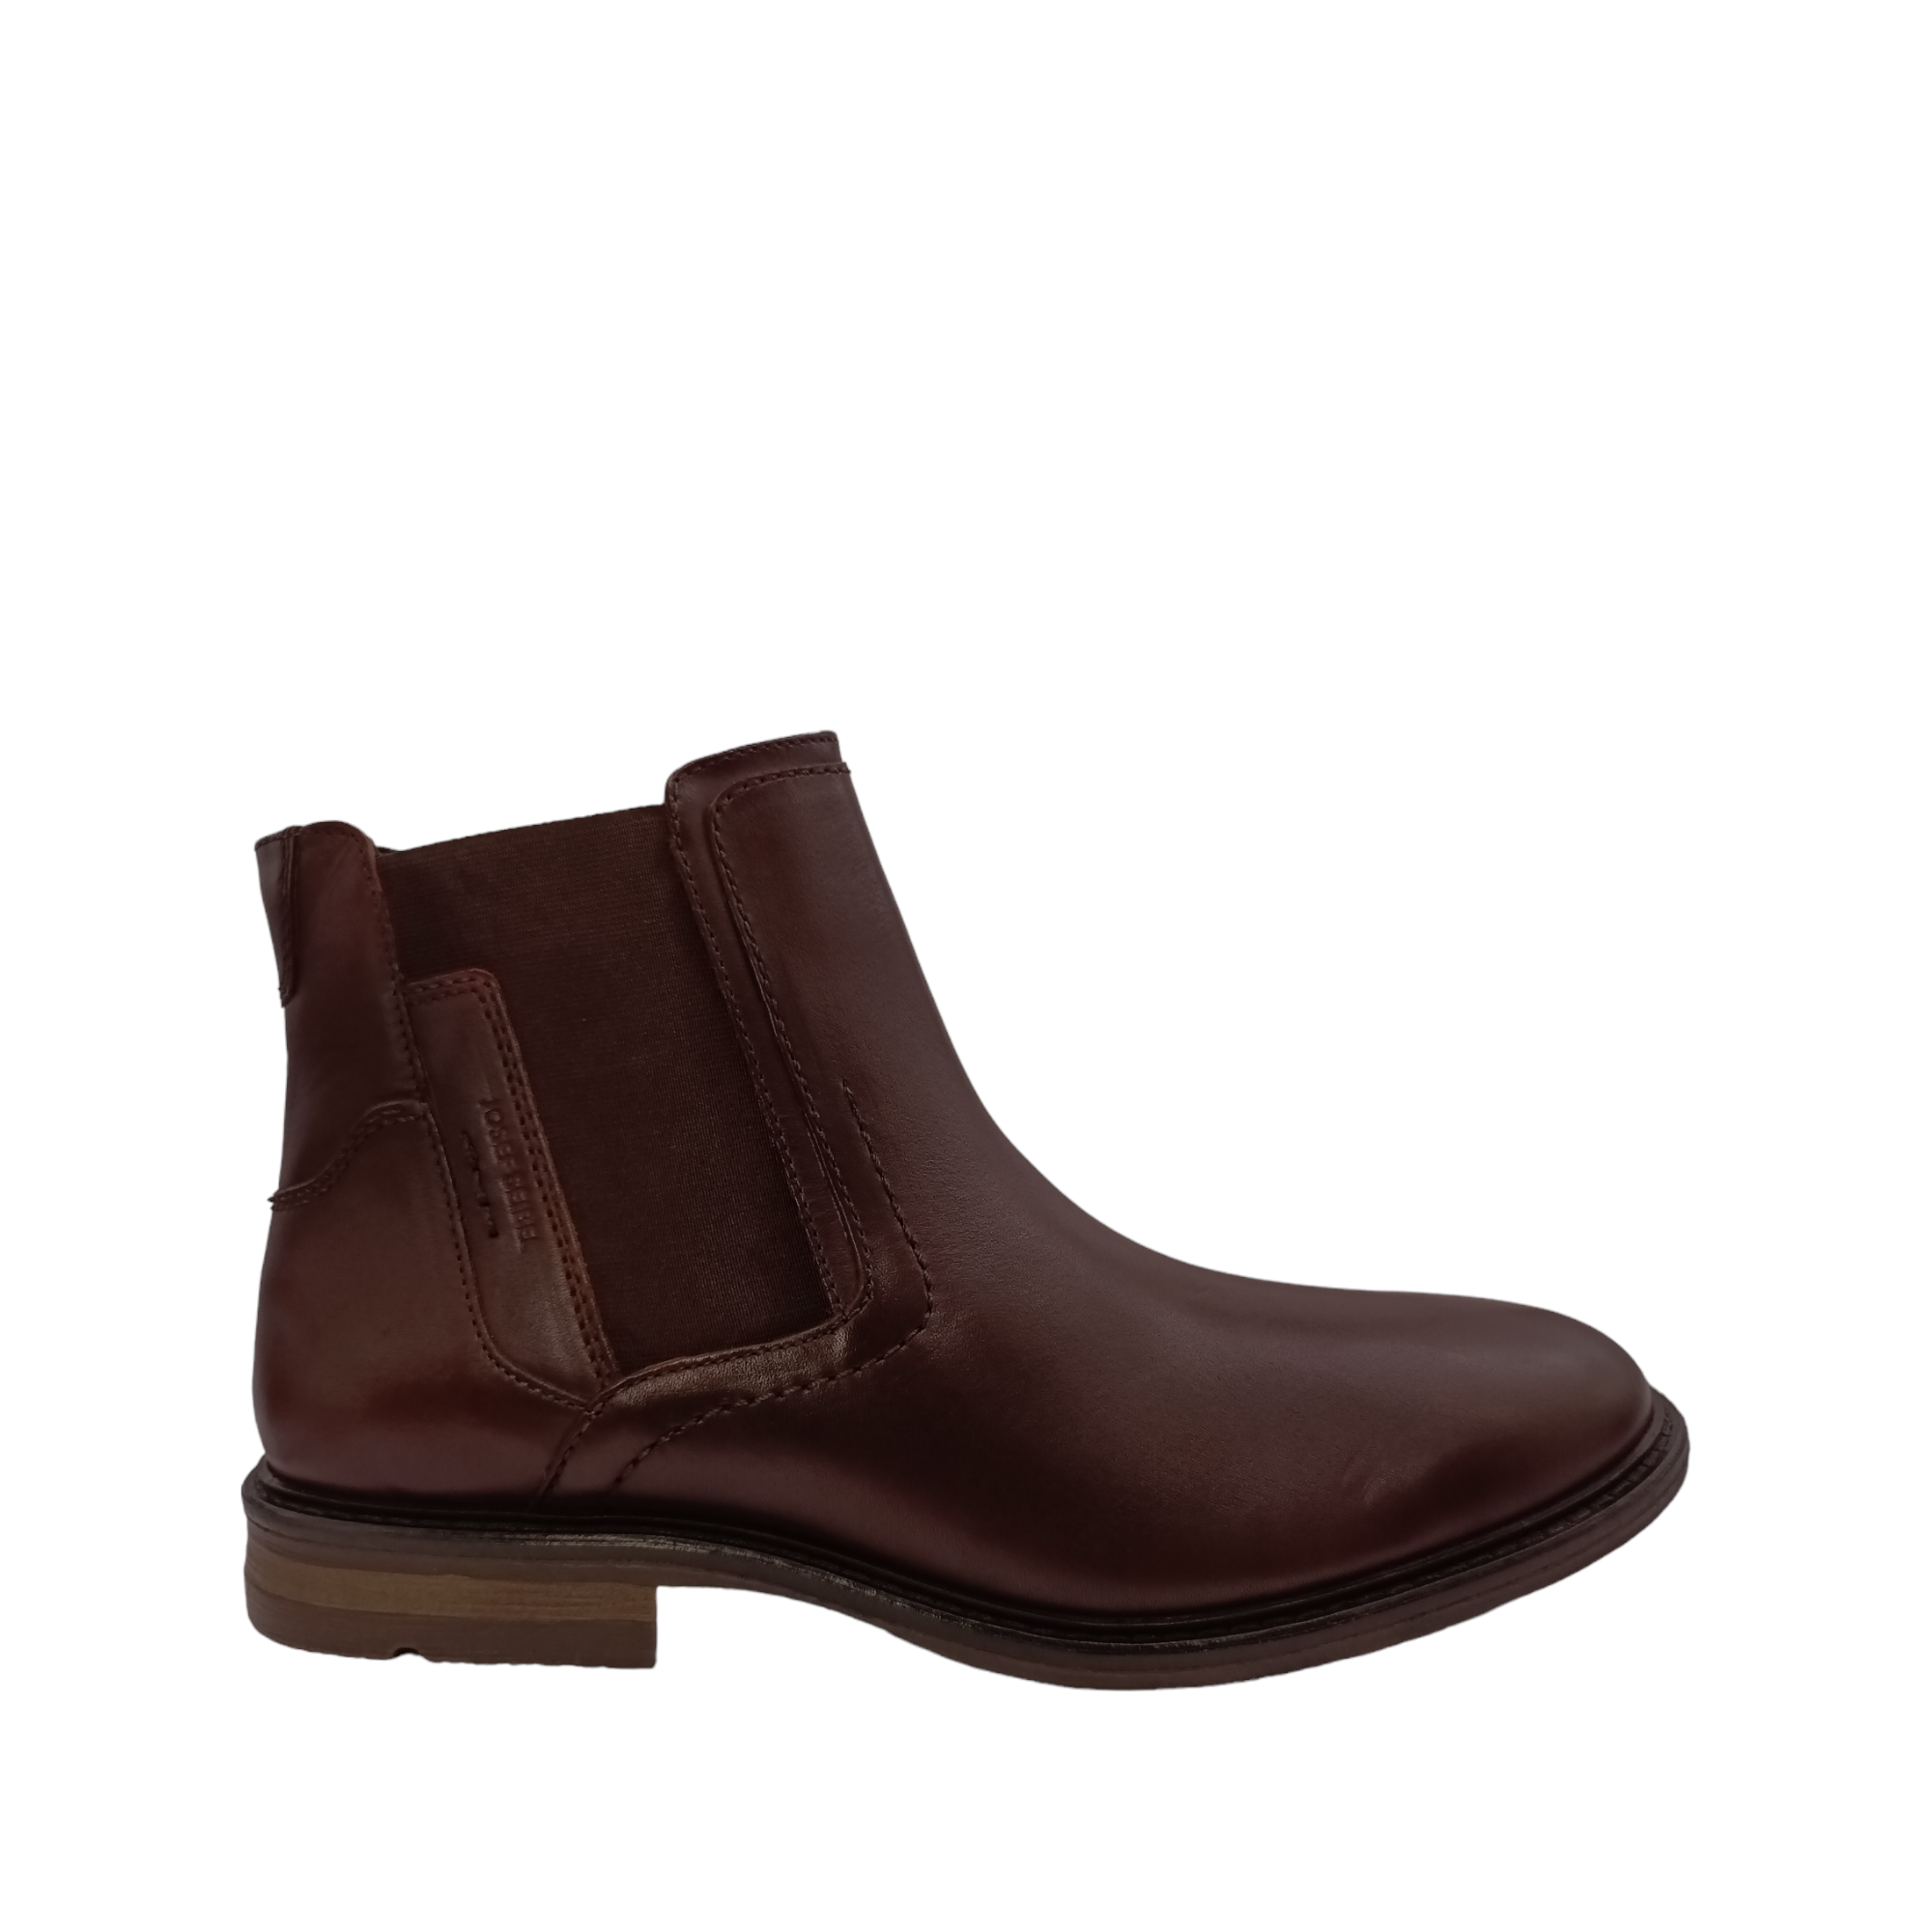 Side angle view of Earl 08 from Josef Seibel. Brown leather boot with large gusset. Shop online and instore with shoe&me